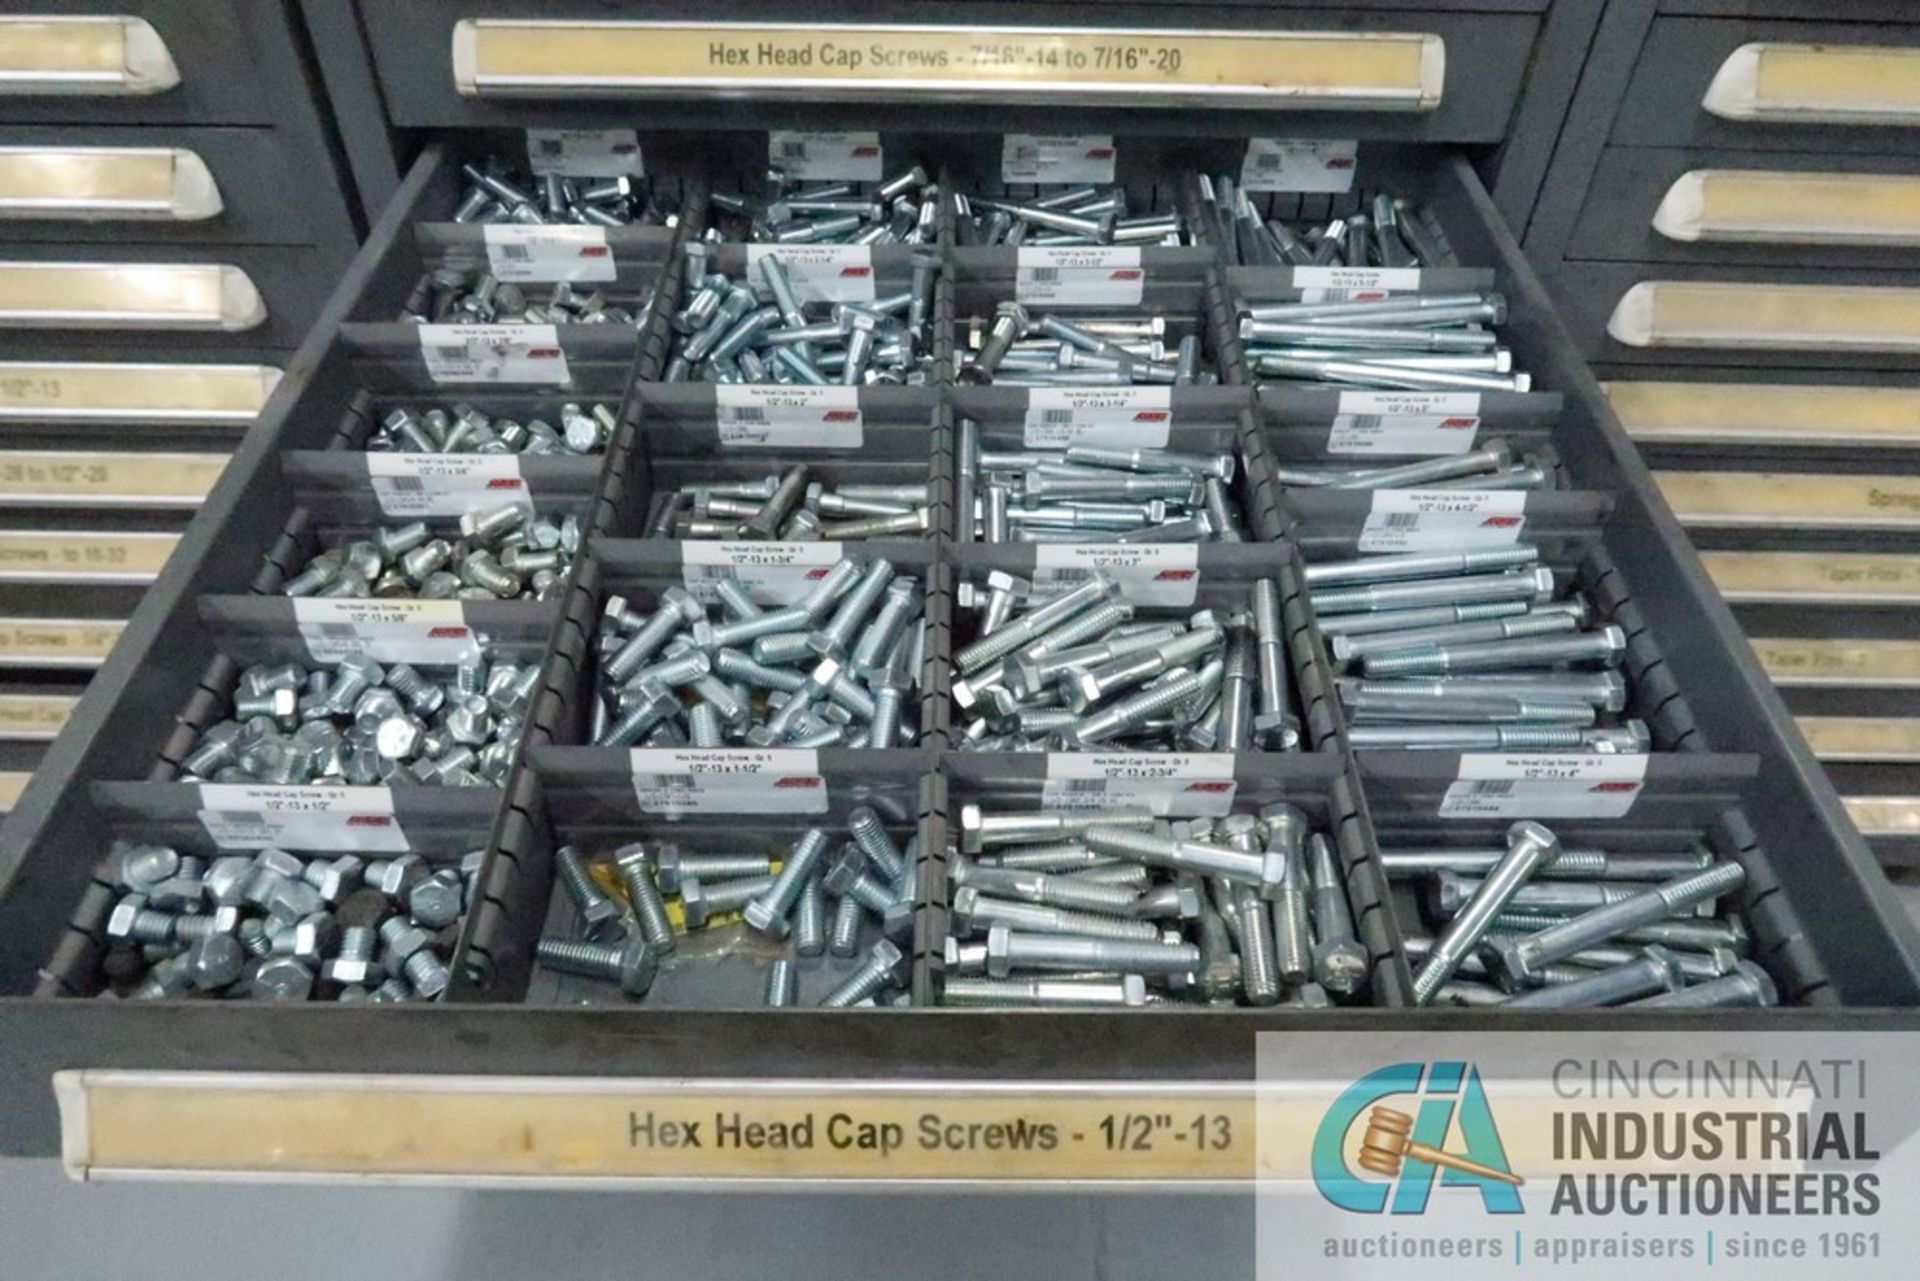 (LOT) 13-DRAWER VIDMAR CABINET WITH CONTENTS INCLUDING HEX HEAD CAP SCREWS (CABINET 7) - Image 9 of 14